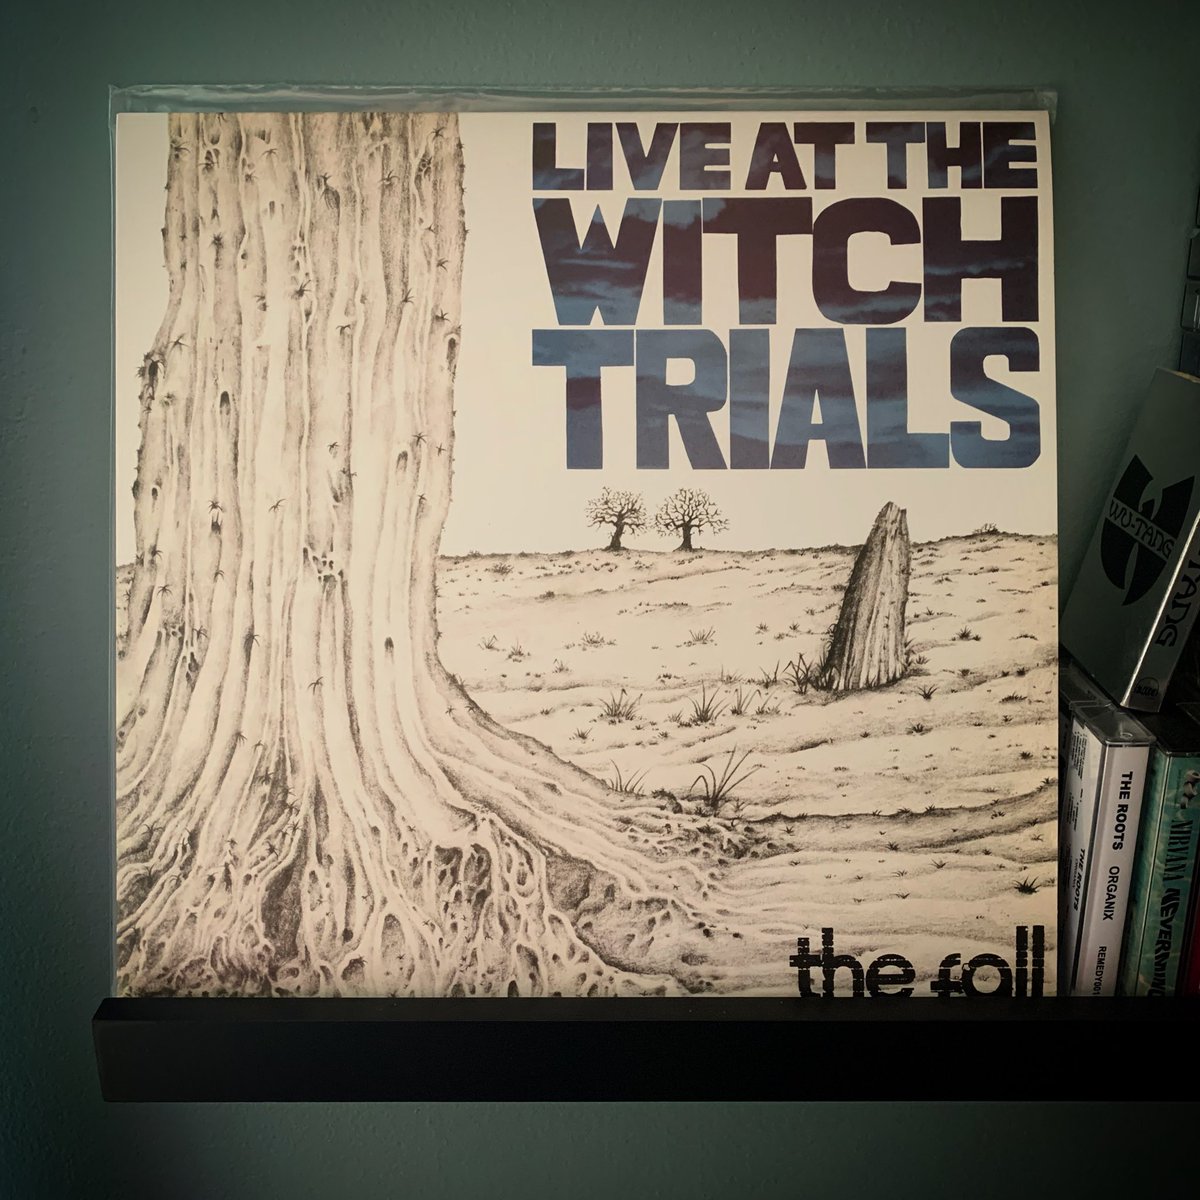 #quarantinelistening: The Fall — Live at the Witch Trials (reissued 2016, @superiorviaduct)
-
This album doesn’t relent and I love the dominance of bass tone. 
-
#thefall #liveatthewitchtrials #ripmarkesmith #martinbramah #yvonnepawlett #marcriley #karlburns